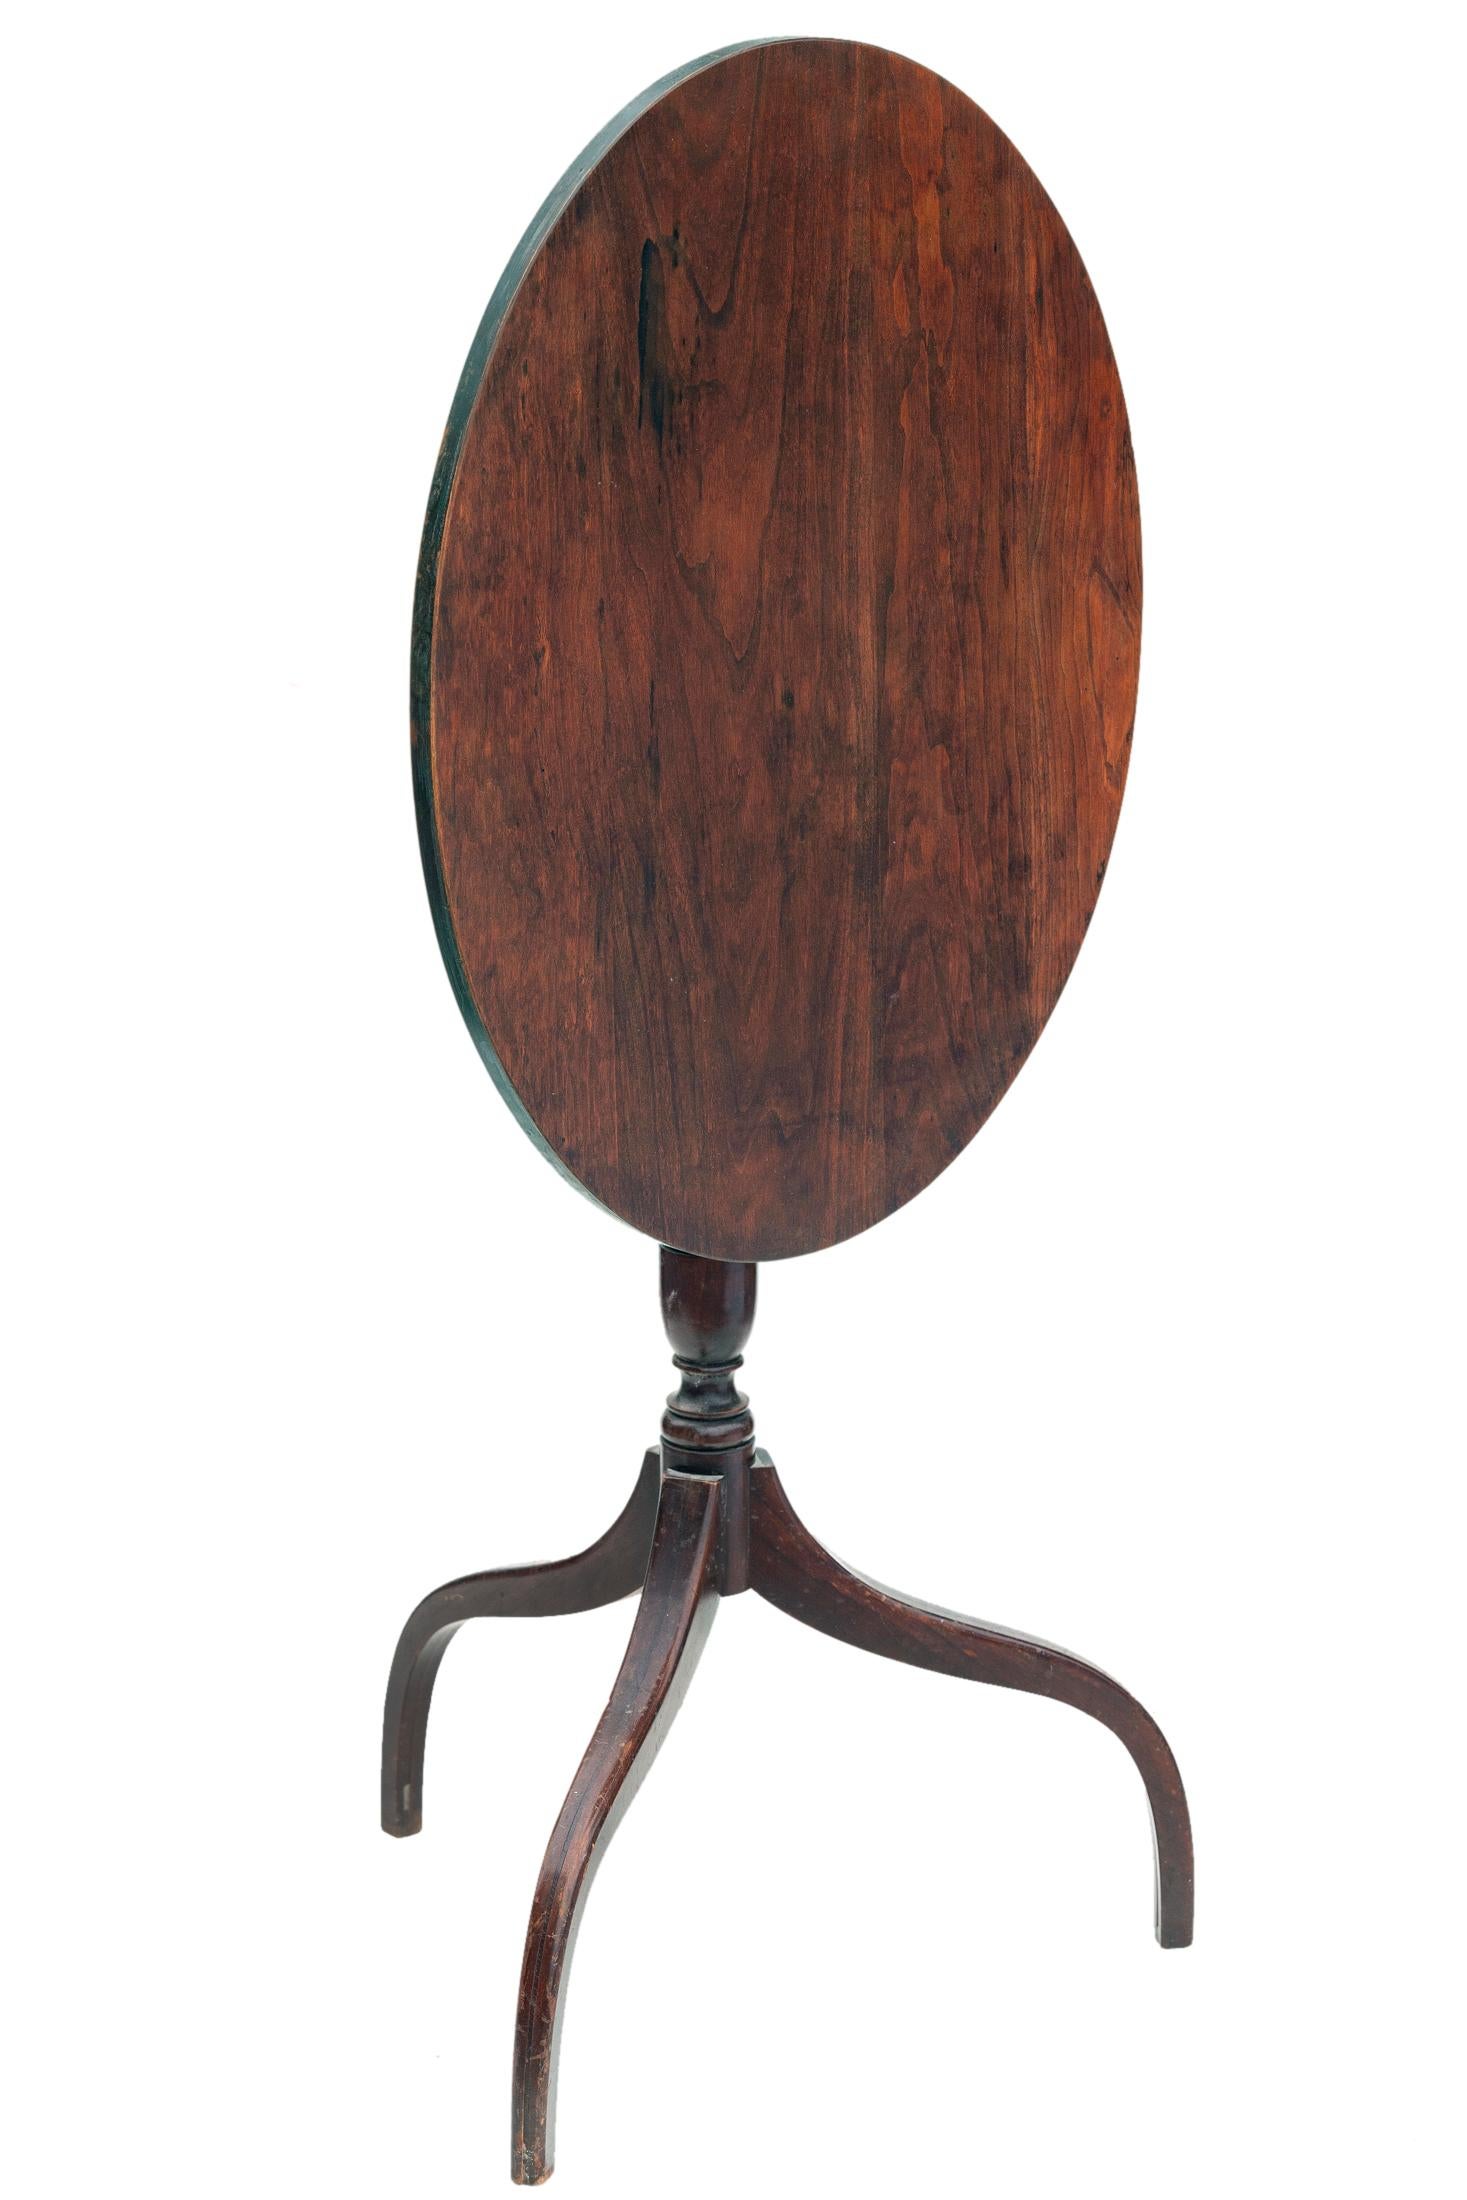 Queen Anne Antique Cherry Oval Lilt Top Table For Sale